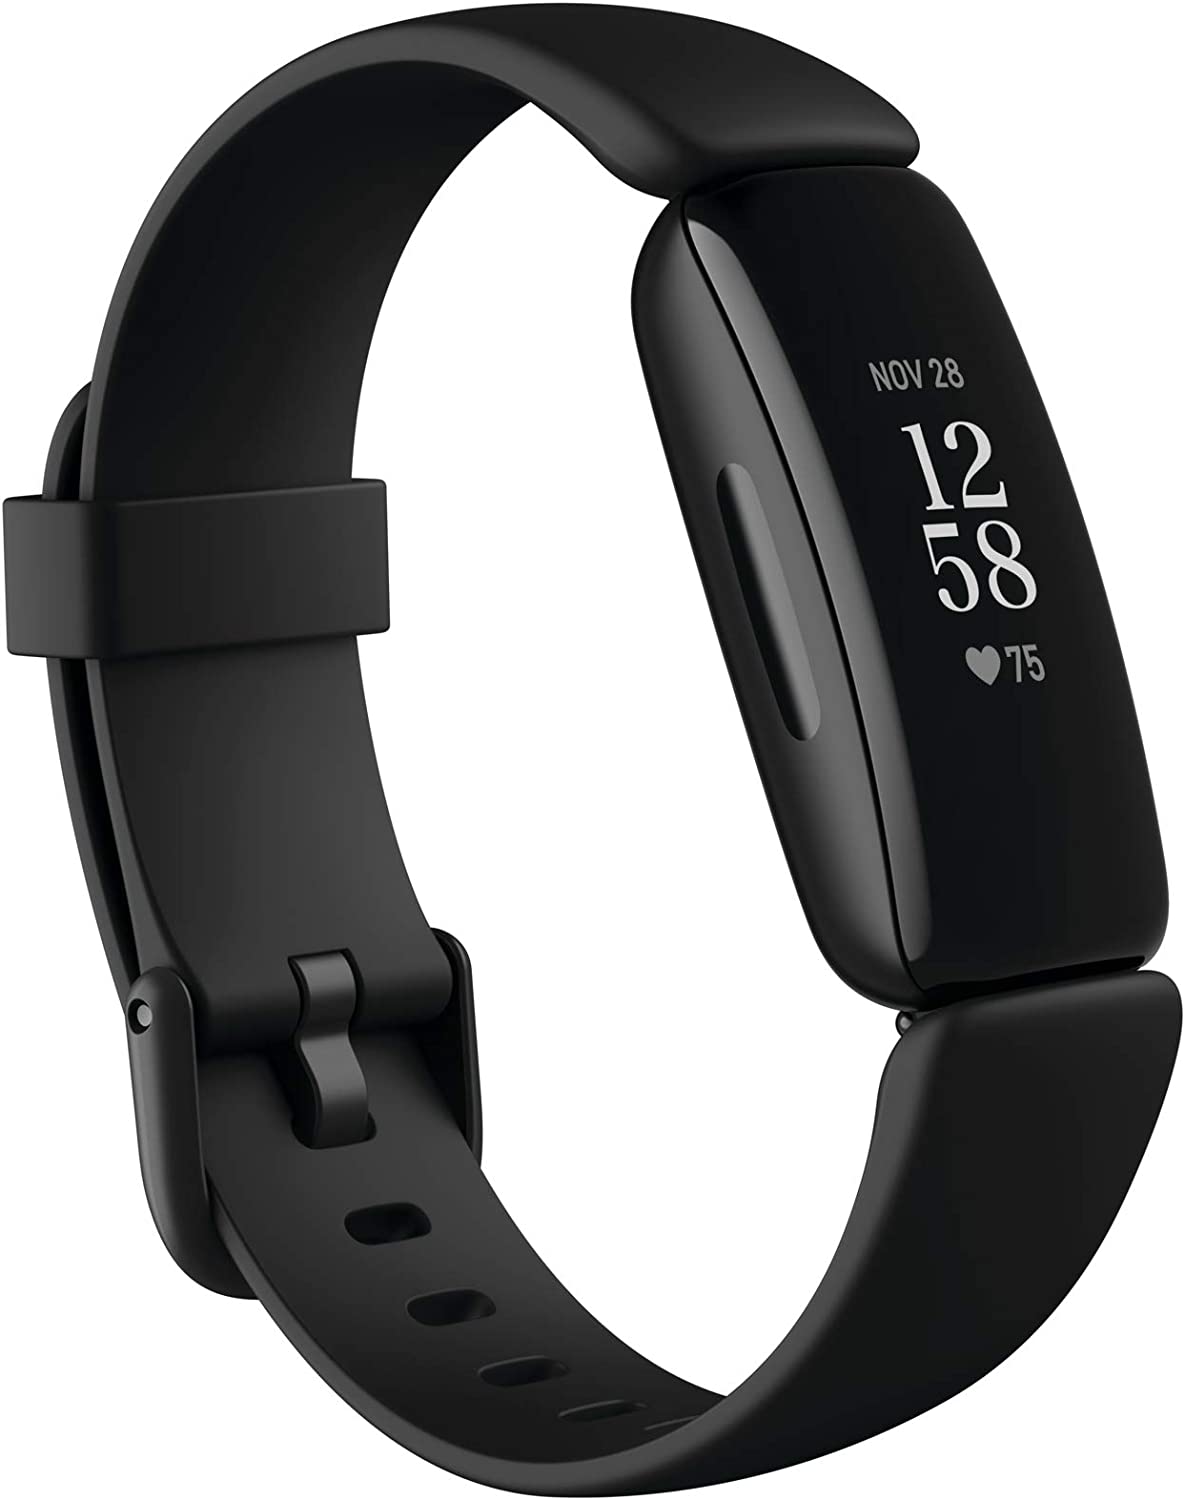 Fitbit Inspire 2 Health & Fitness Tracker with a Free 1-Year Premium Trial, 24/7 Heart Rate, Lunar White, One Size (S & L Bands Included)